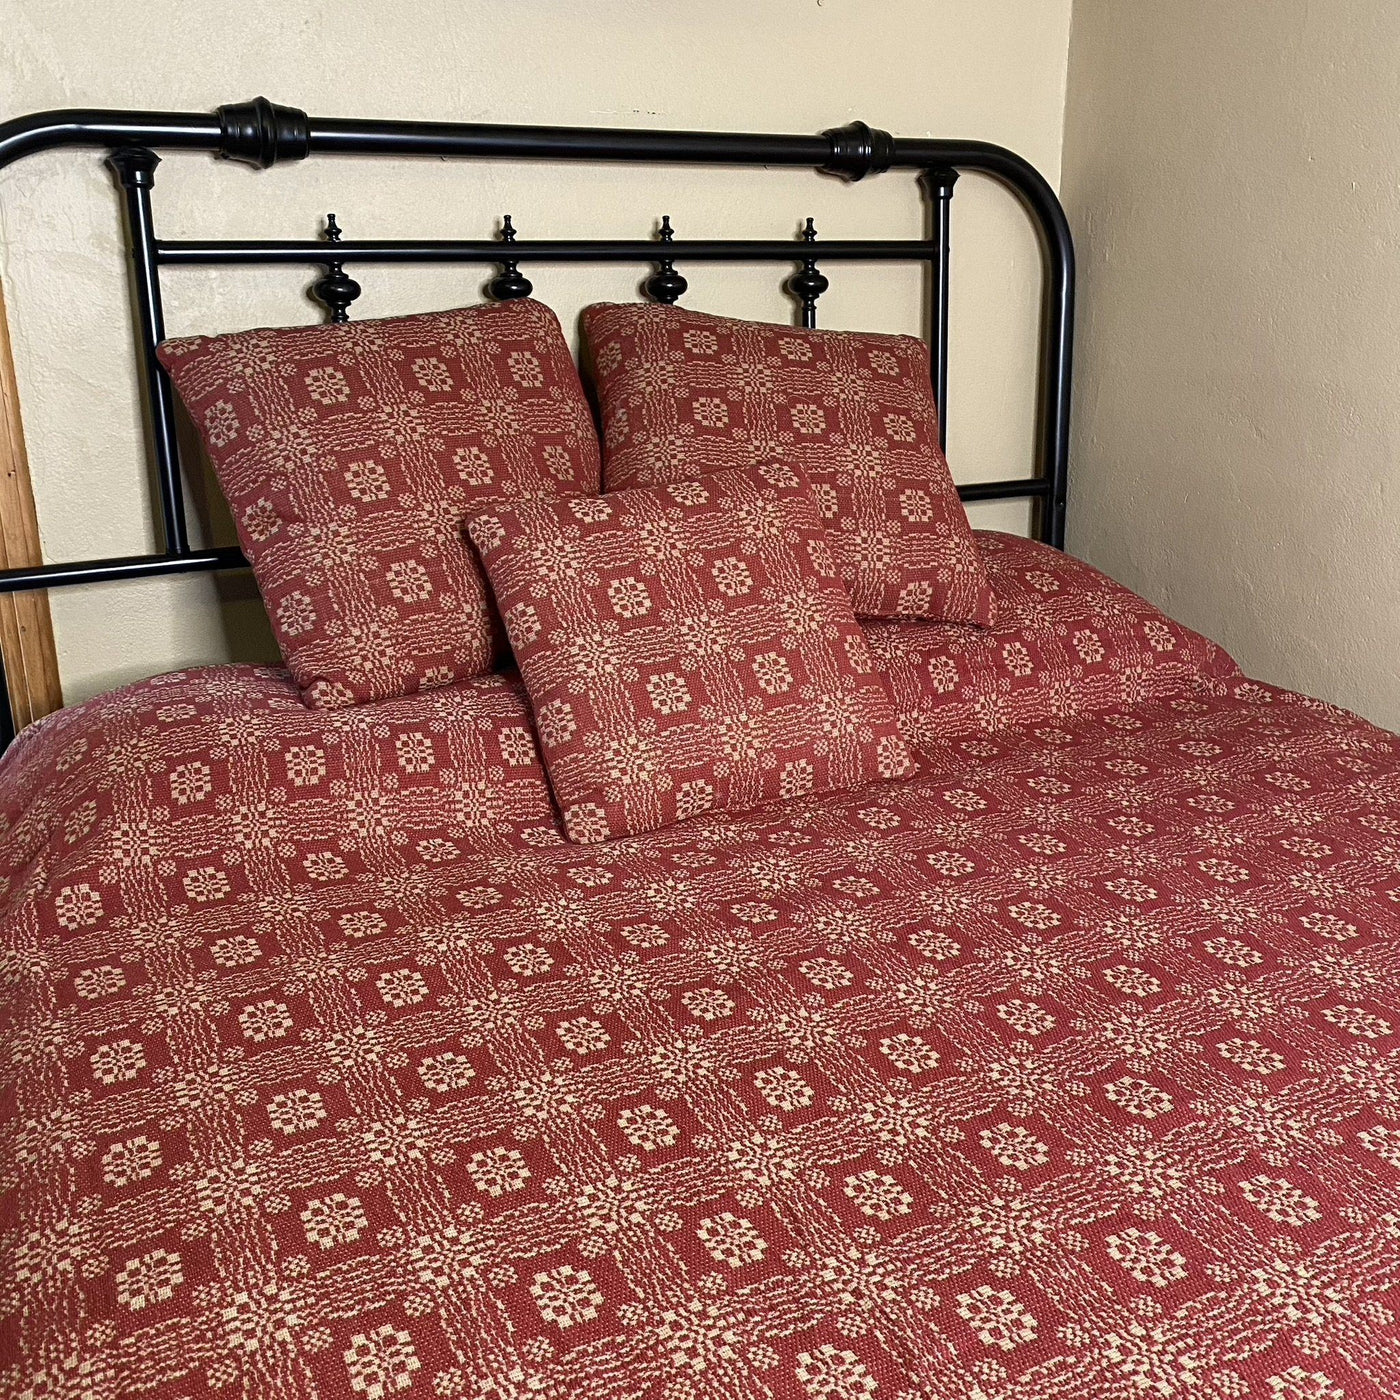 Gettysburg Cranberry and Tan Bedding